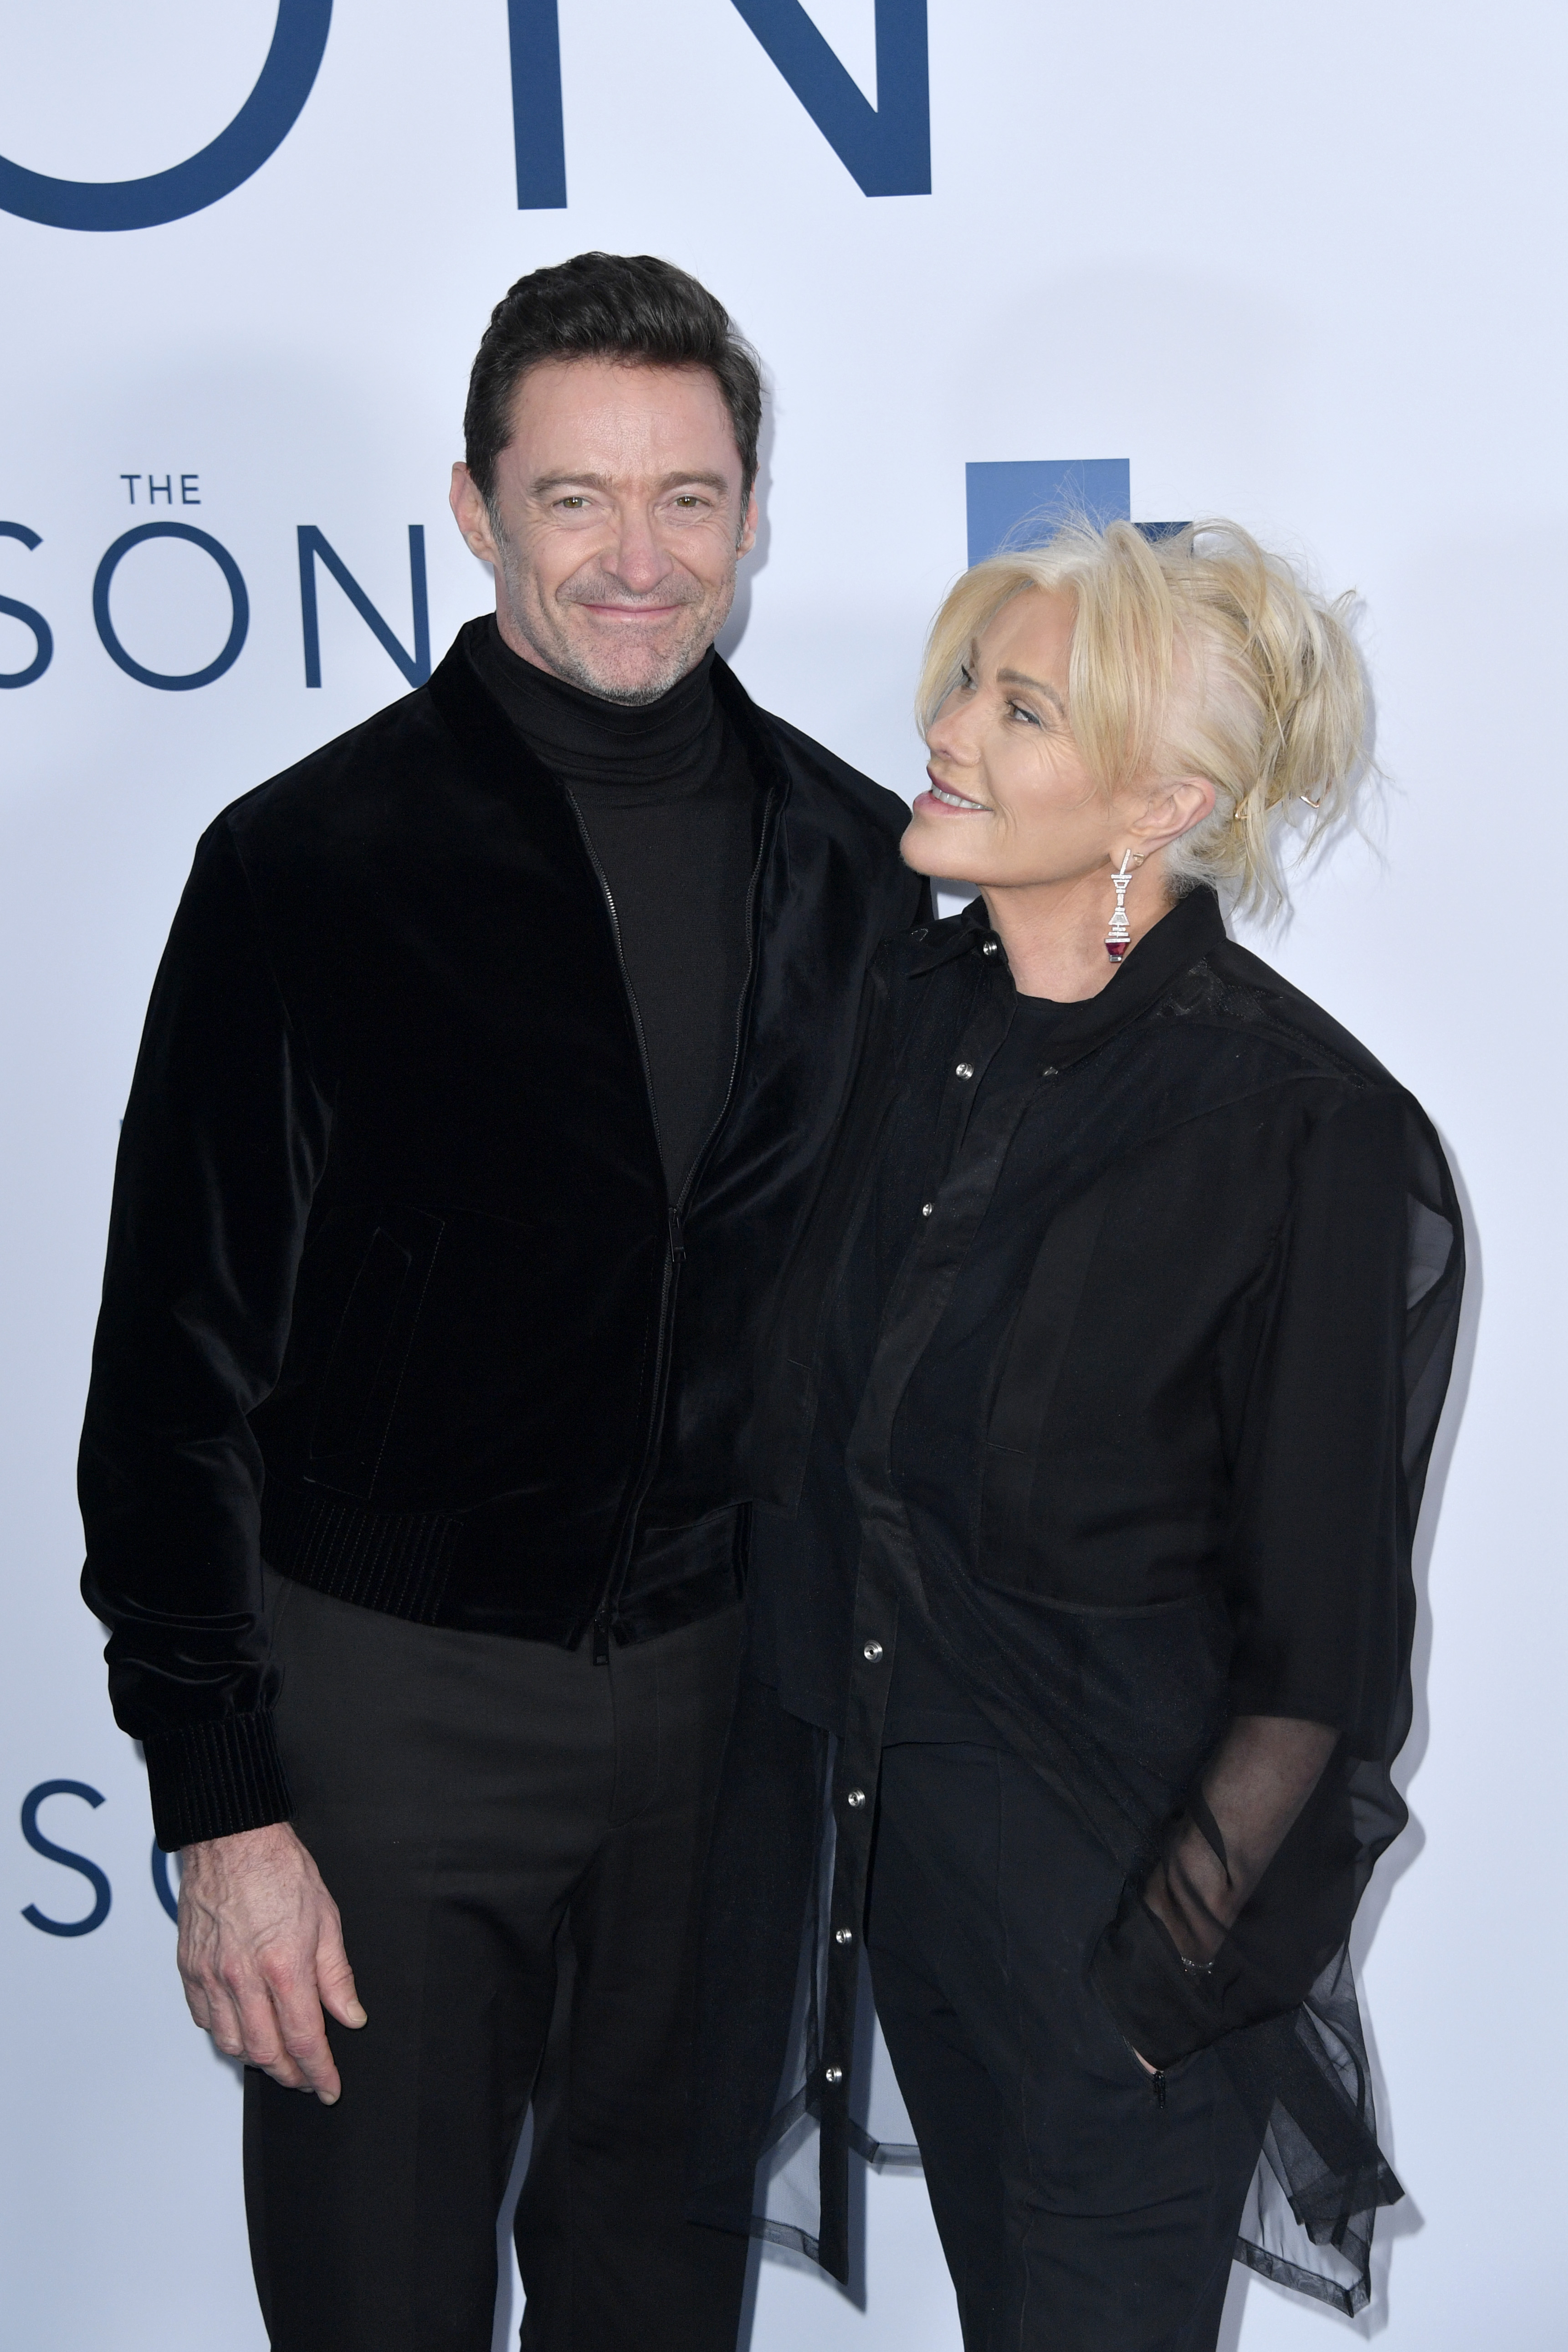 Hugh Jackman and Deborra-Lee Furness at the "The Son" Premiere in Paris, France on February 21, 2023 | Source: Getty Images